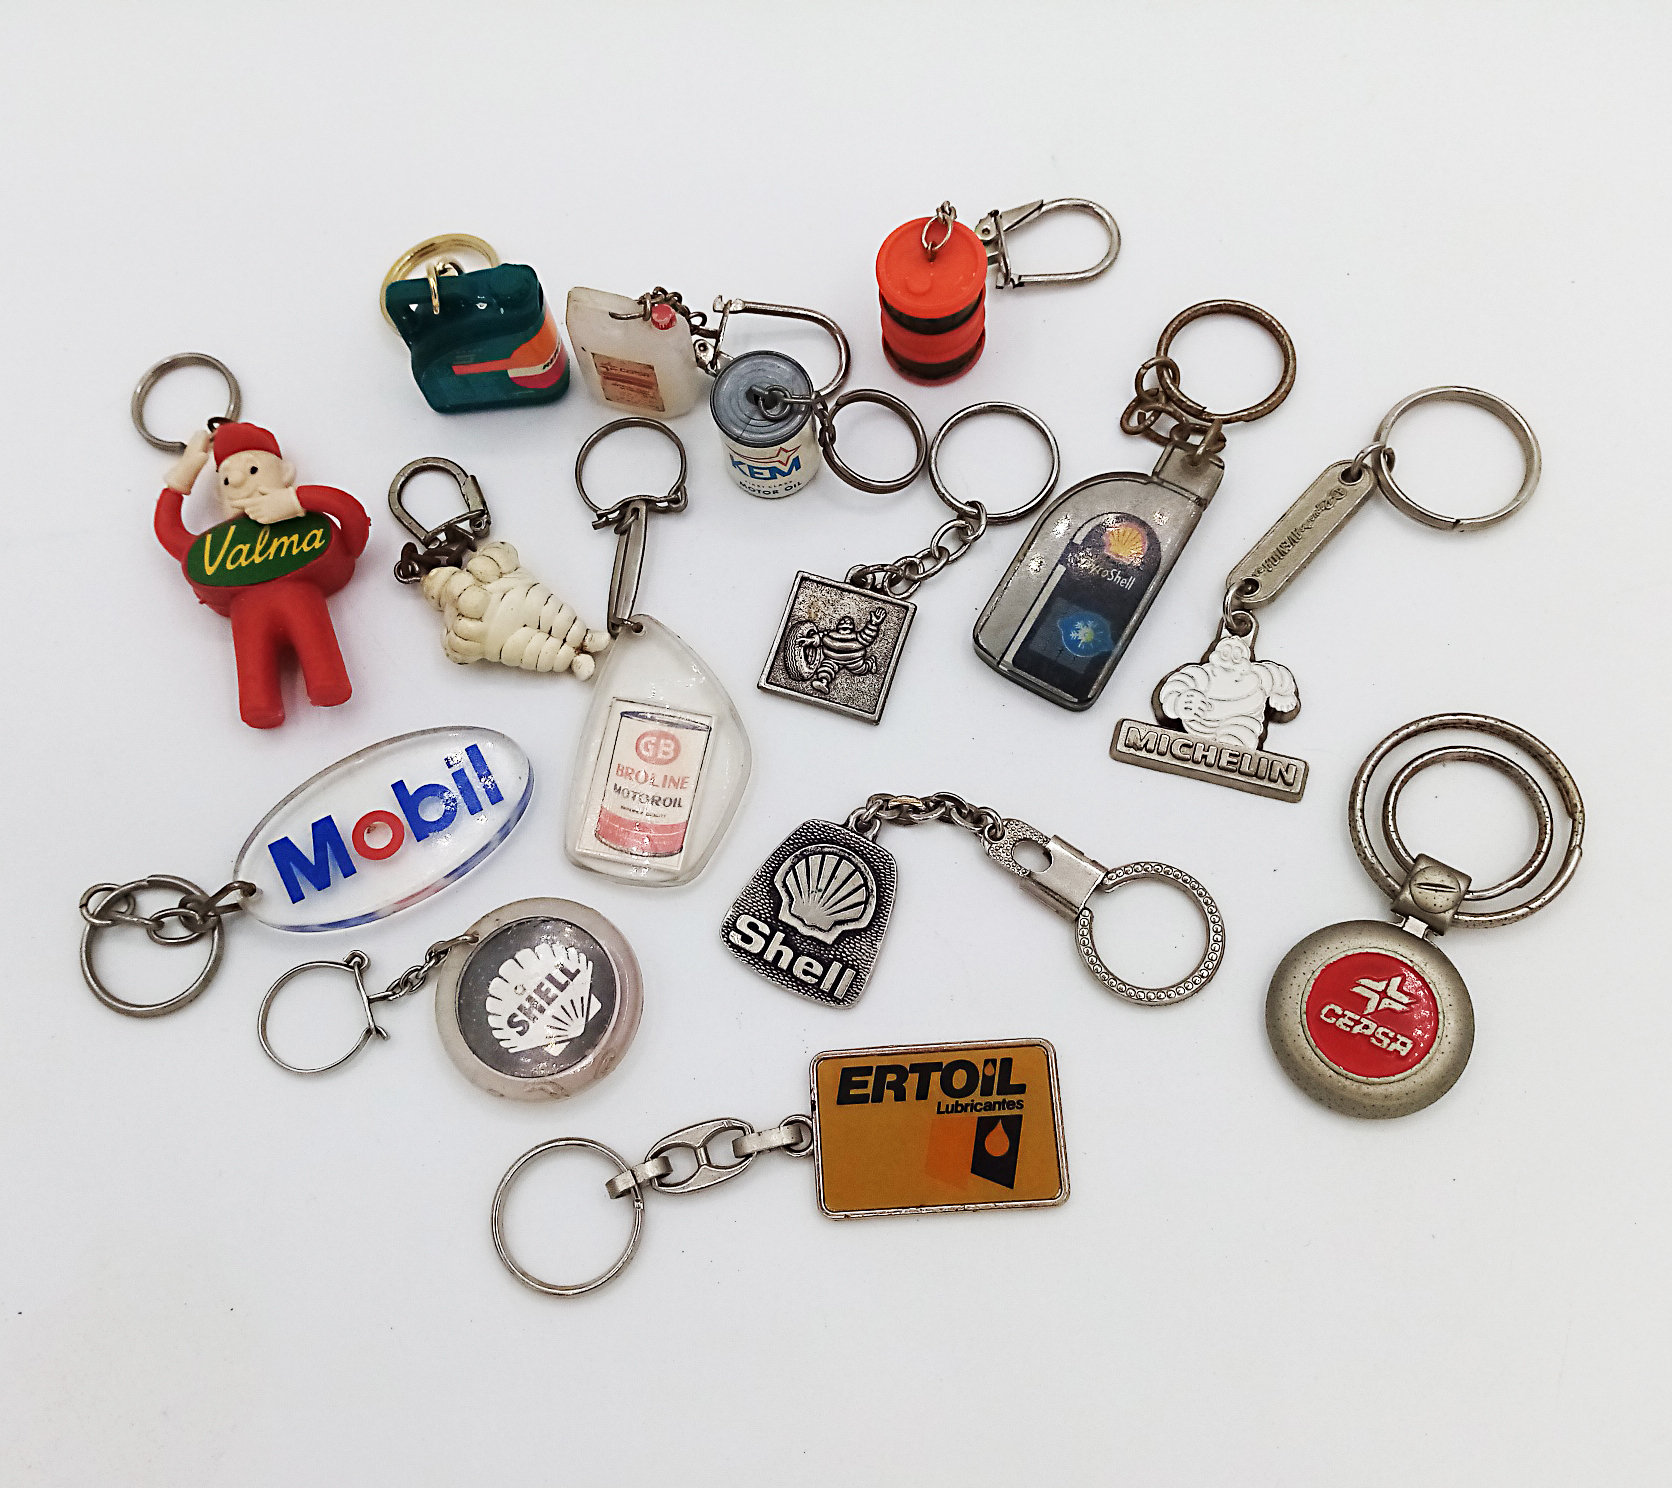 MyFrenchDiscoveries Rare Vintage Enamelled Metal Shell Motor Oil Keyring Made in France 1950s